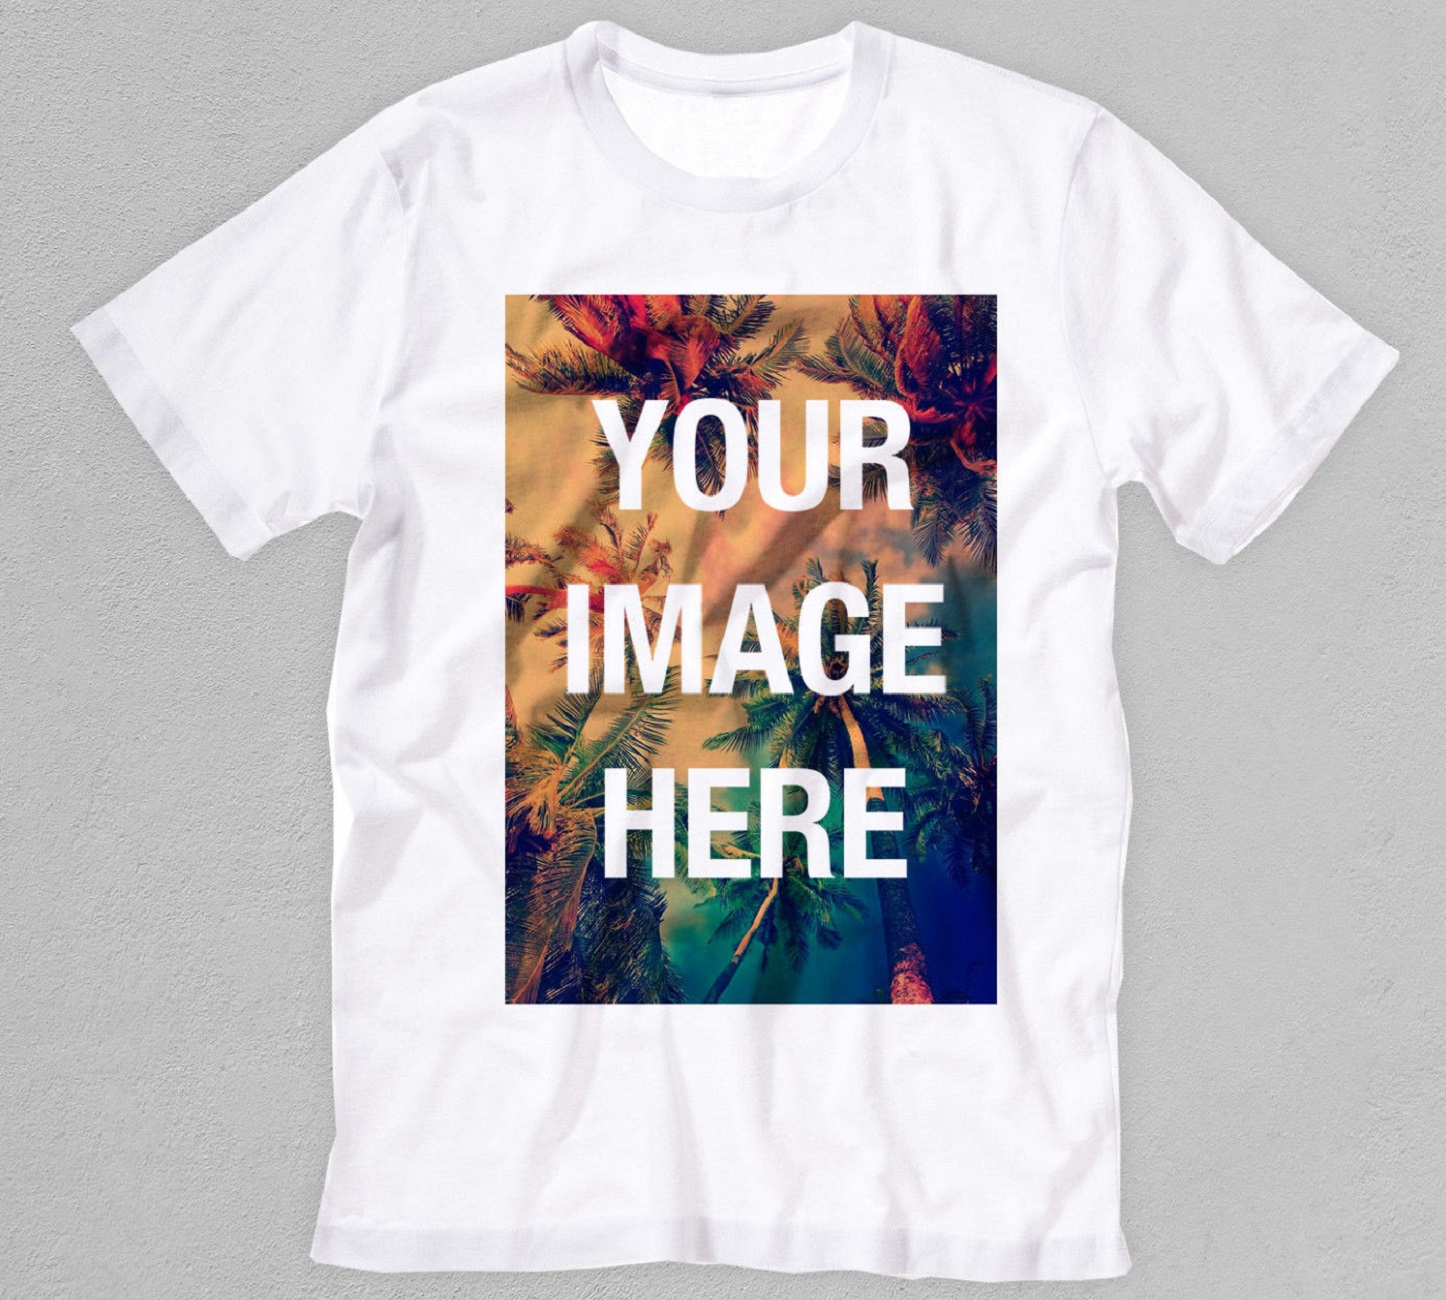 Expressing Yourself with Personalised T-shirts